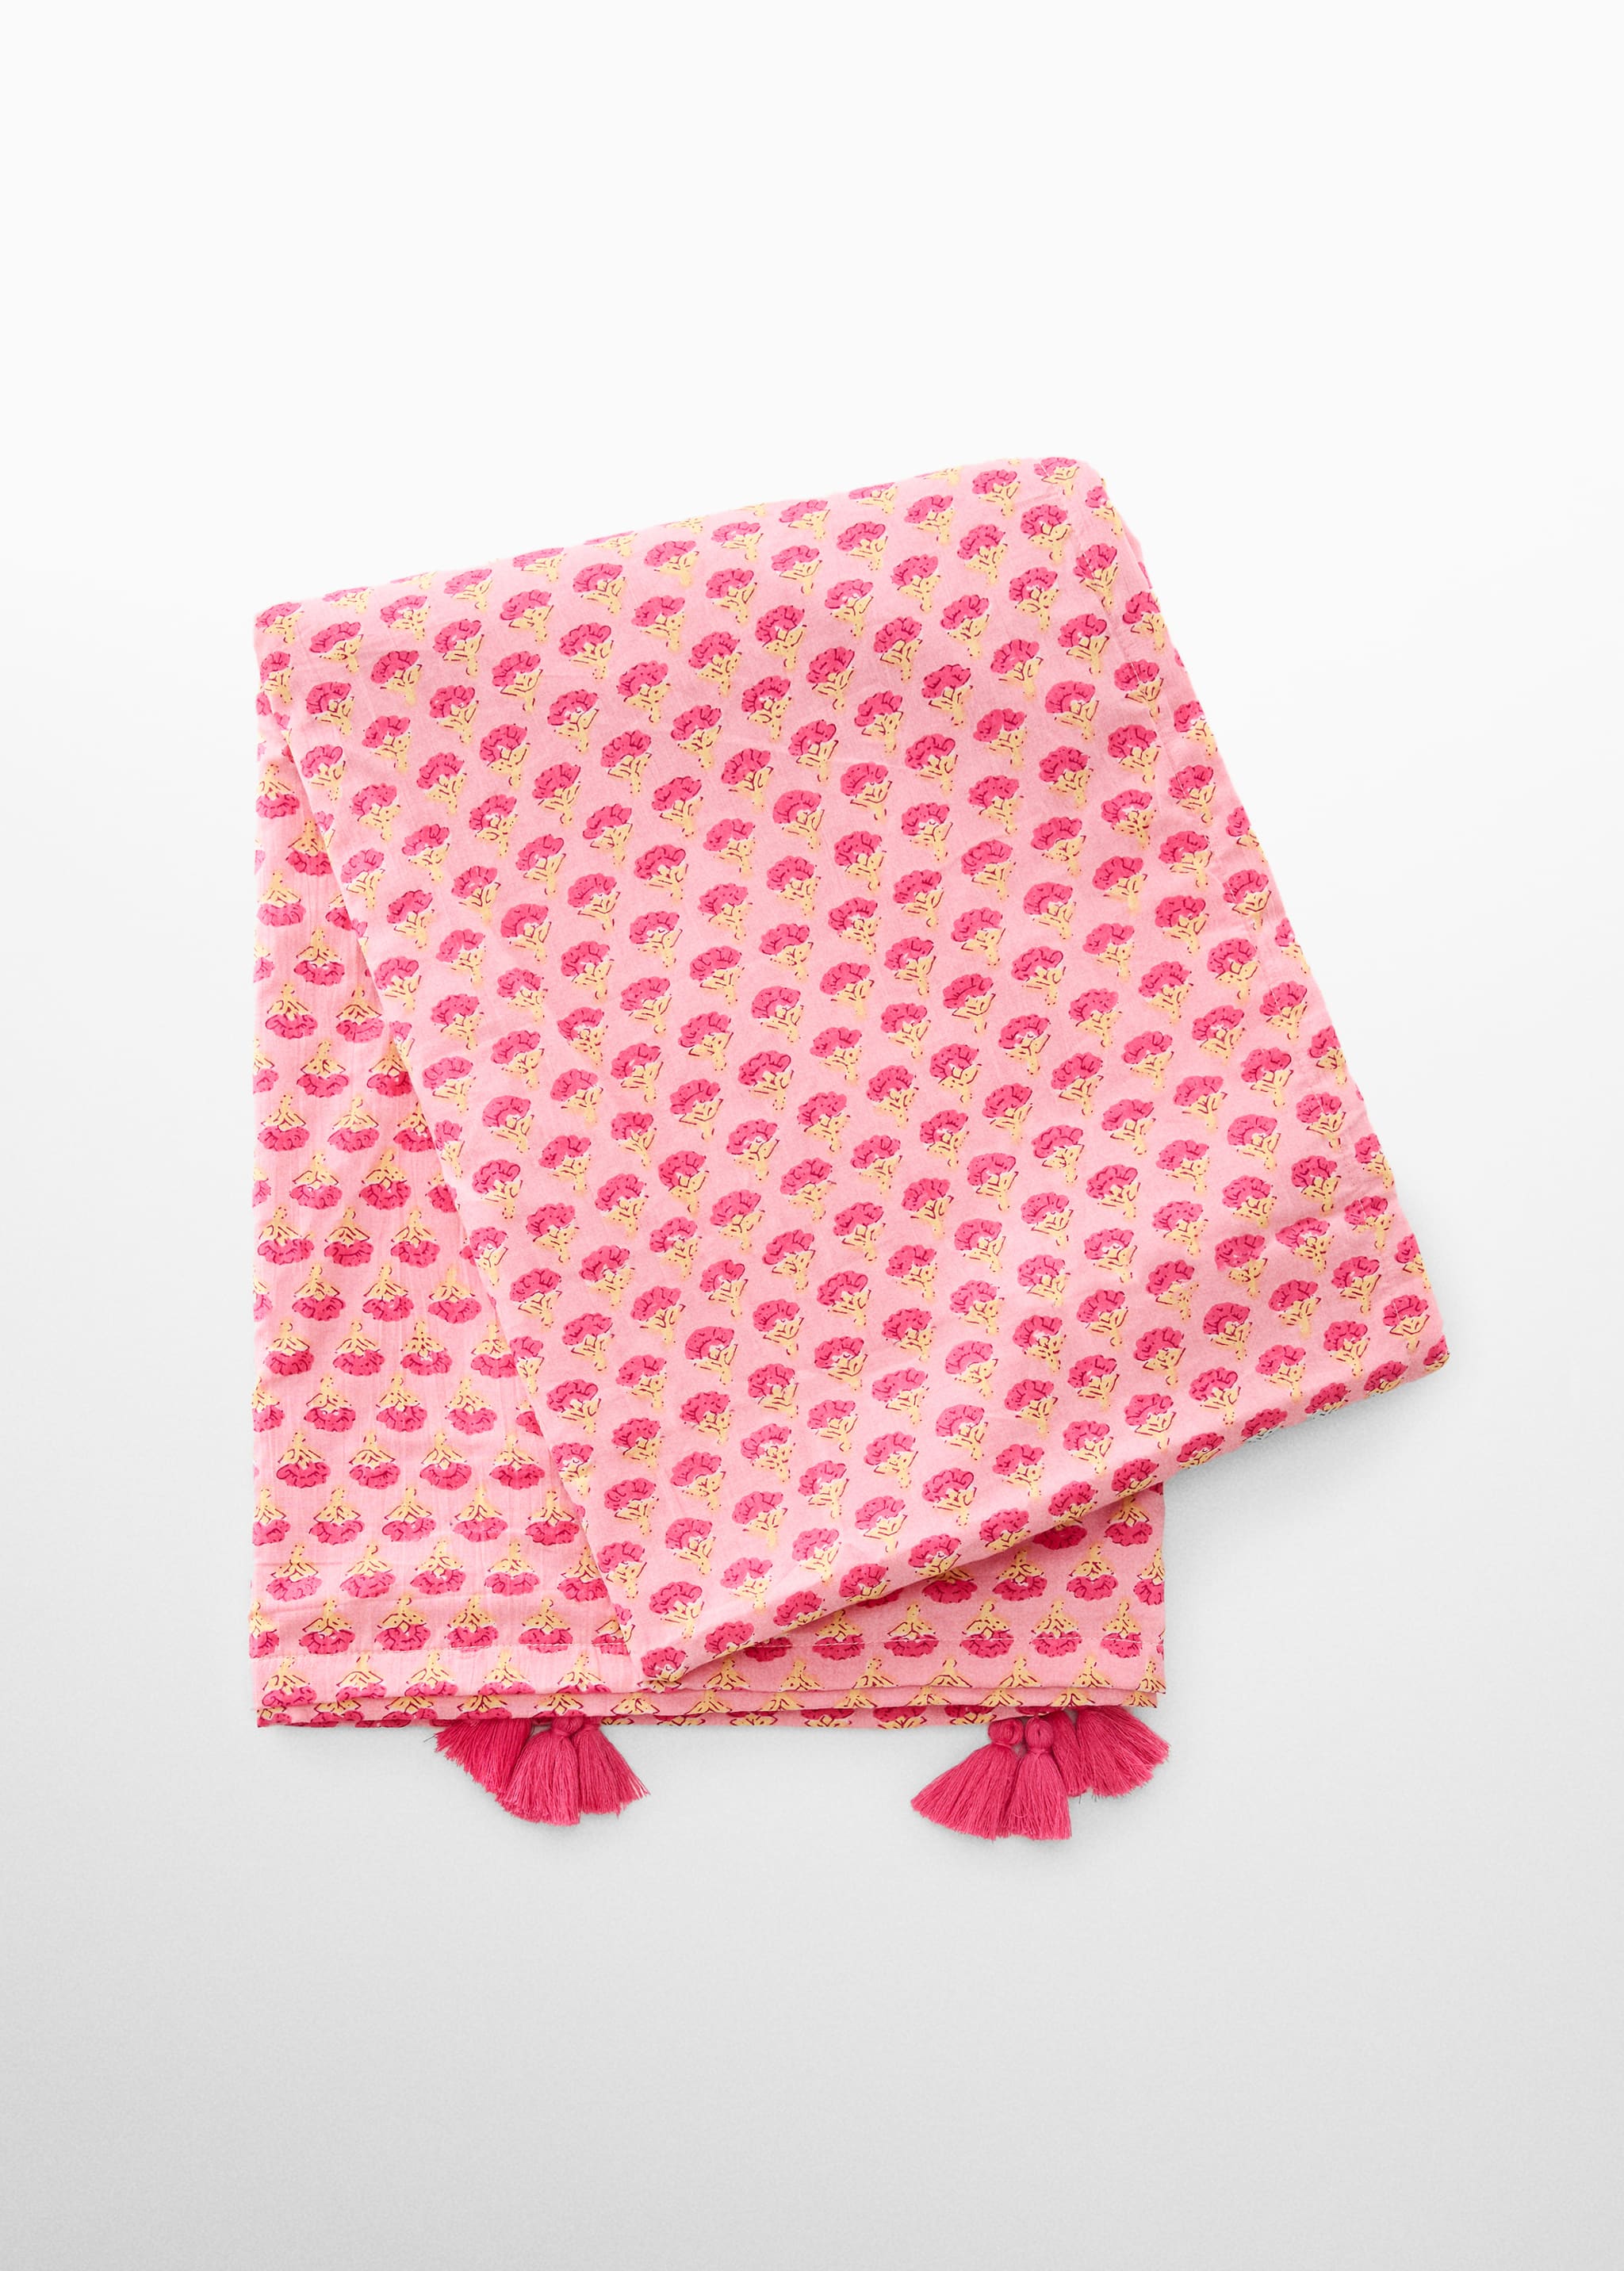 100% cotton printed towel - Article without model